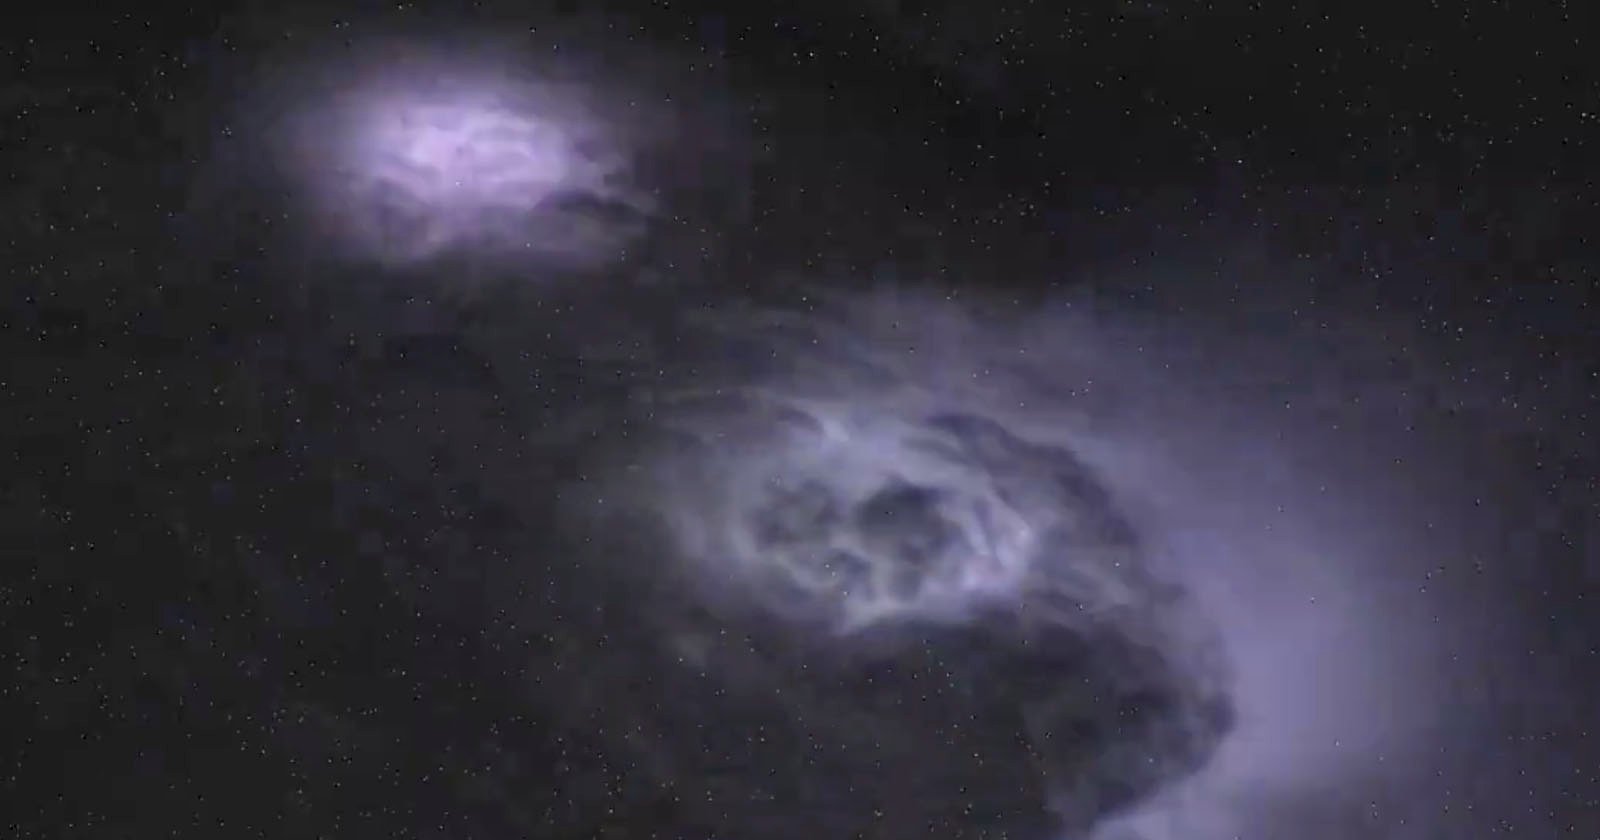  check out powerful thunderstorm seen from space 